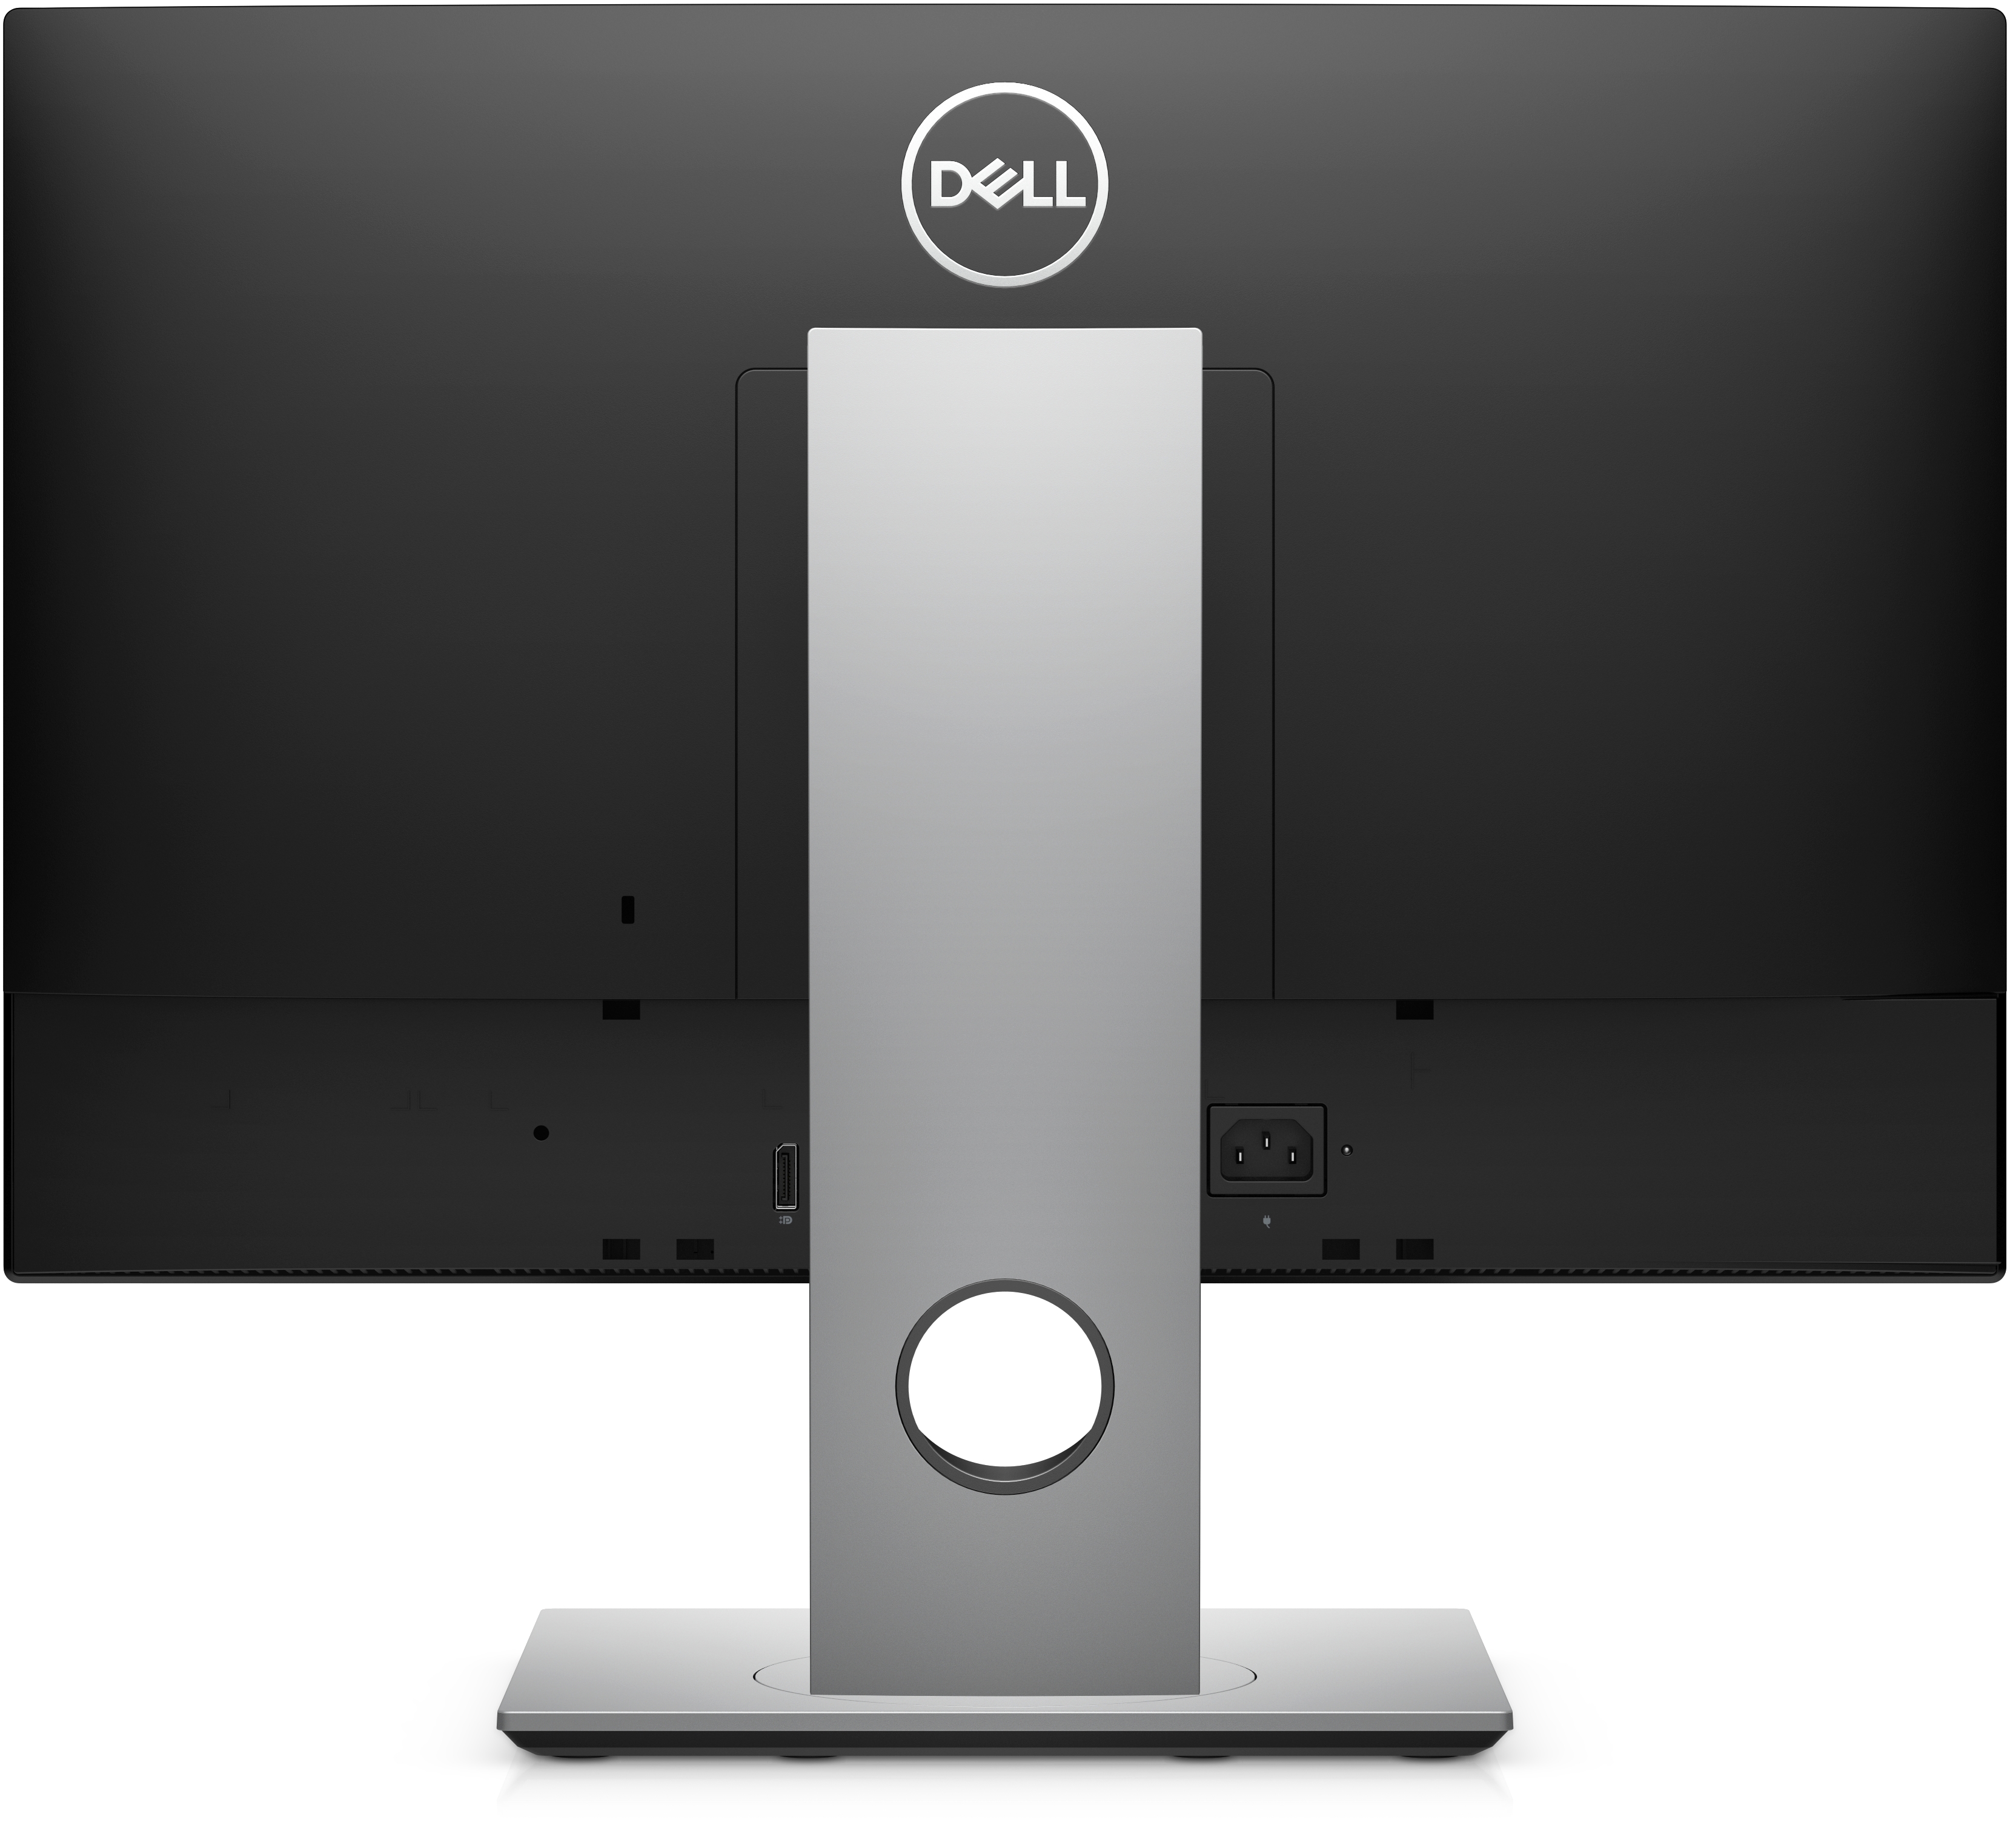 Dell - I5 All in One Pc